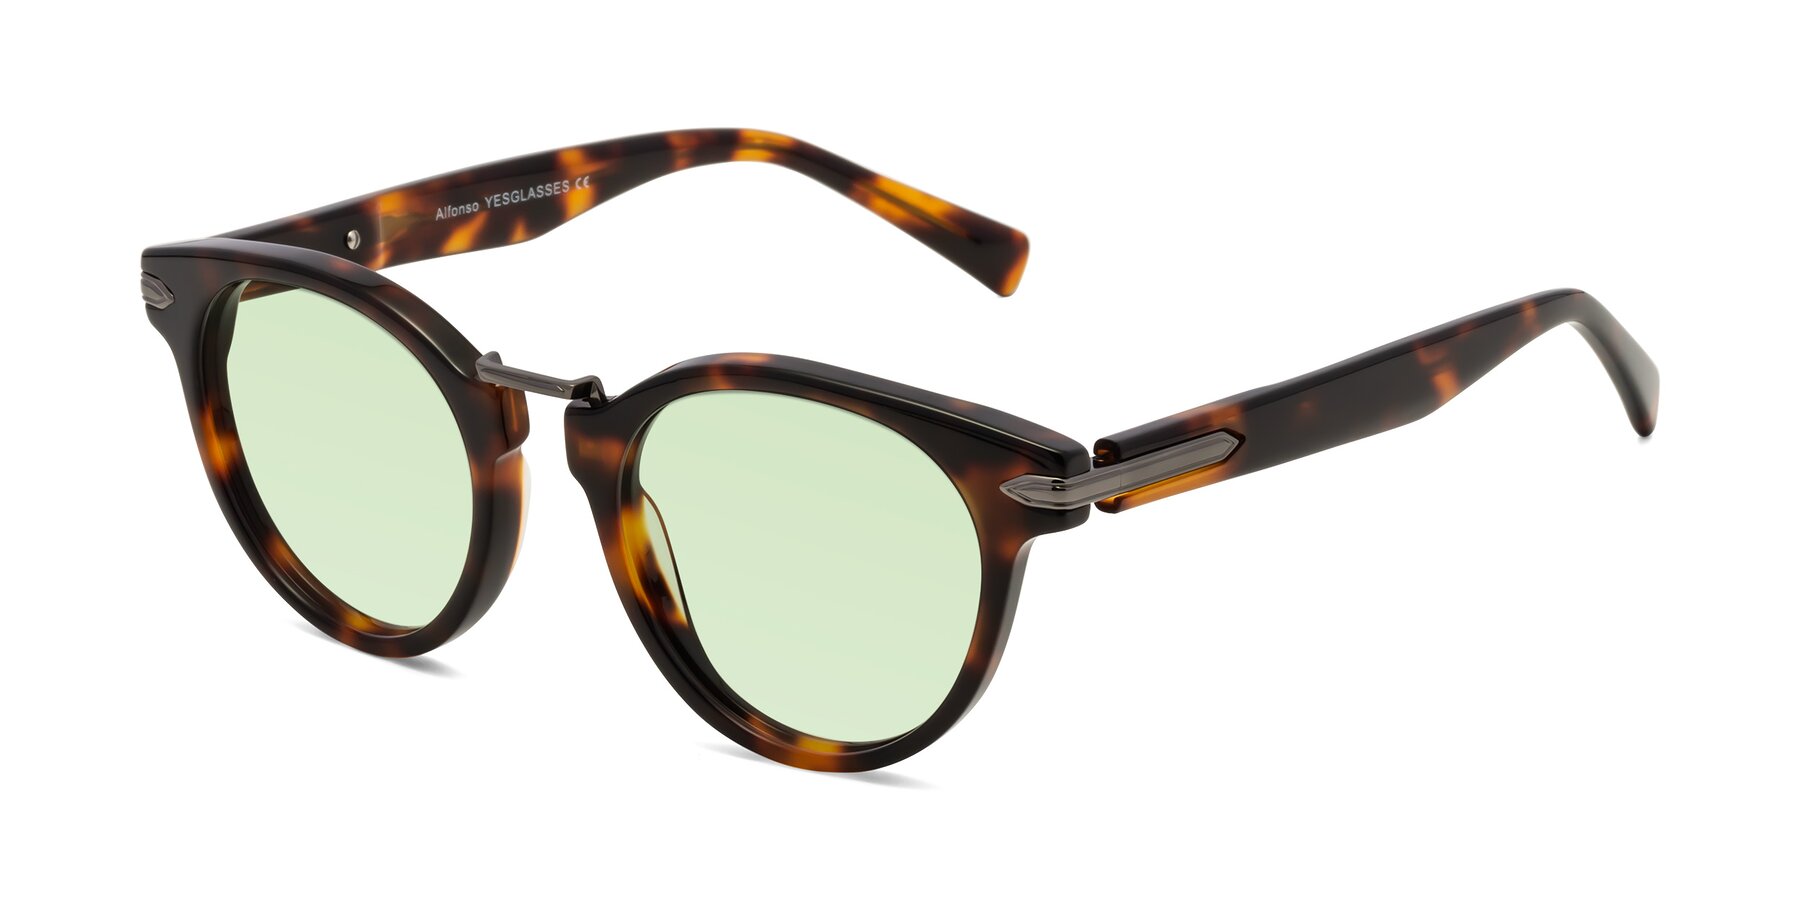 Angle of Alfonso in Tortoise with Light Green Tinted Lenses